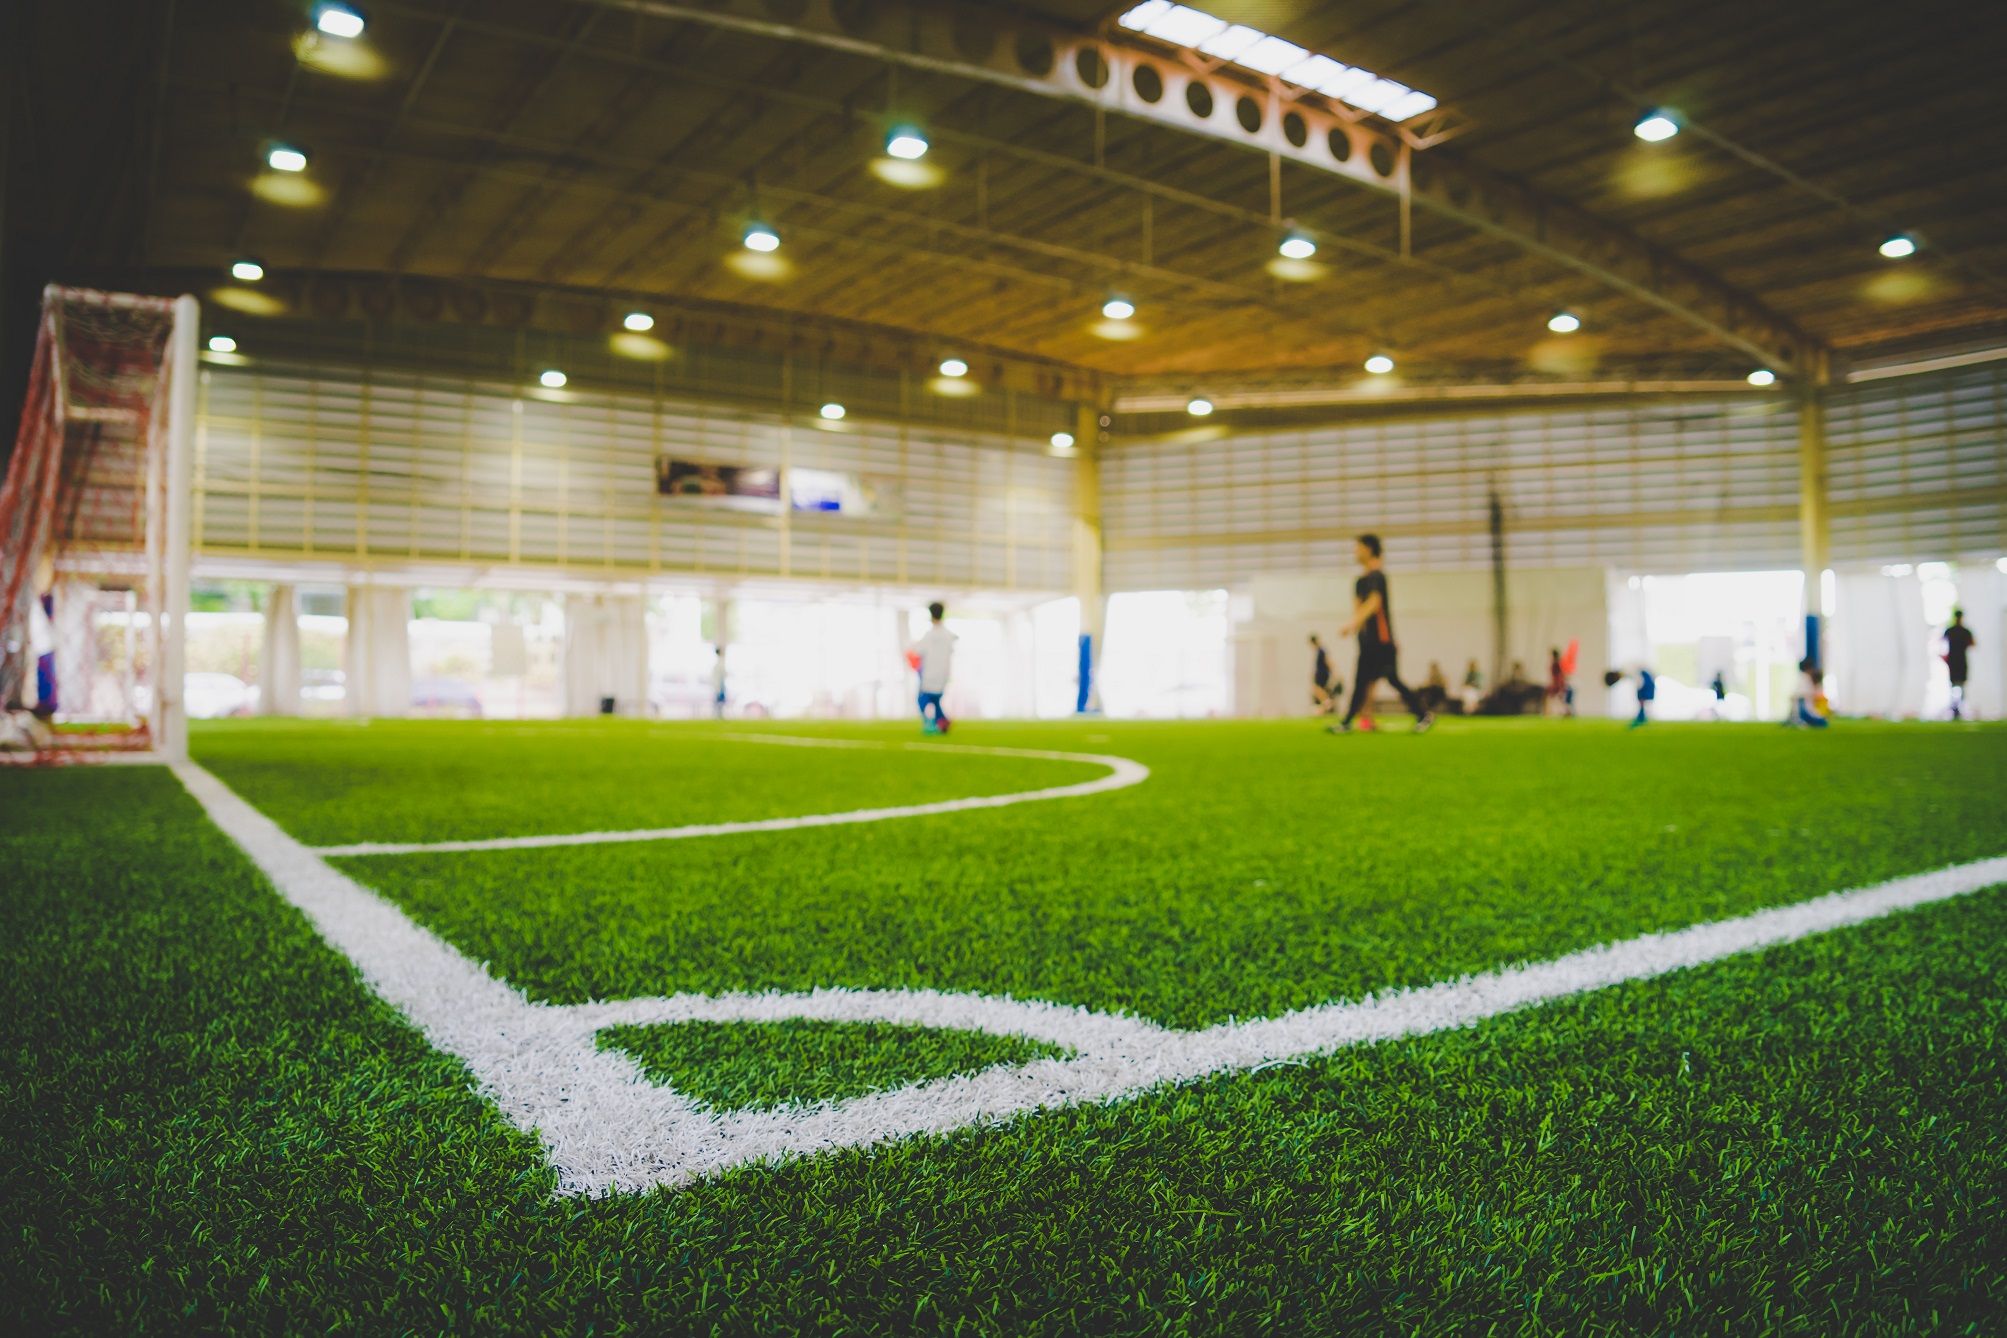 Add a Flawless Soccer Field to Your Facilities